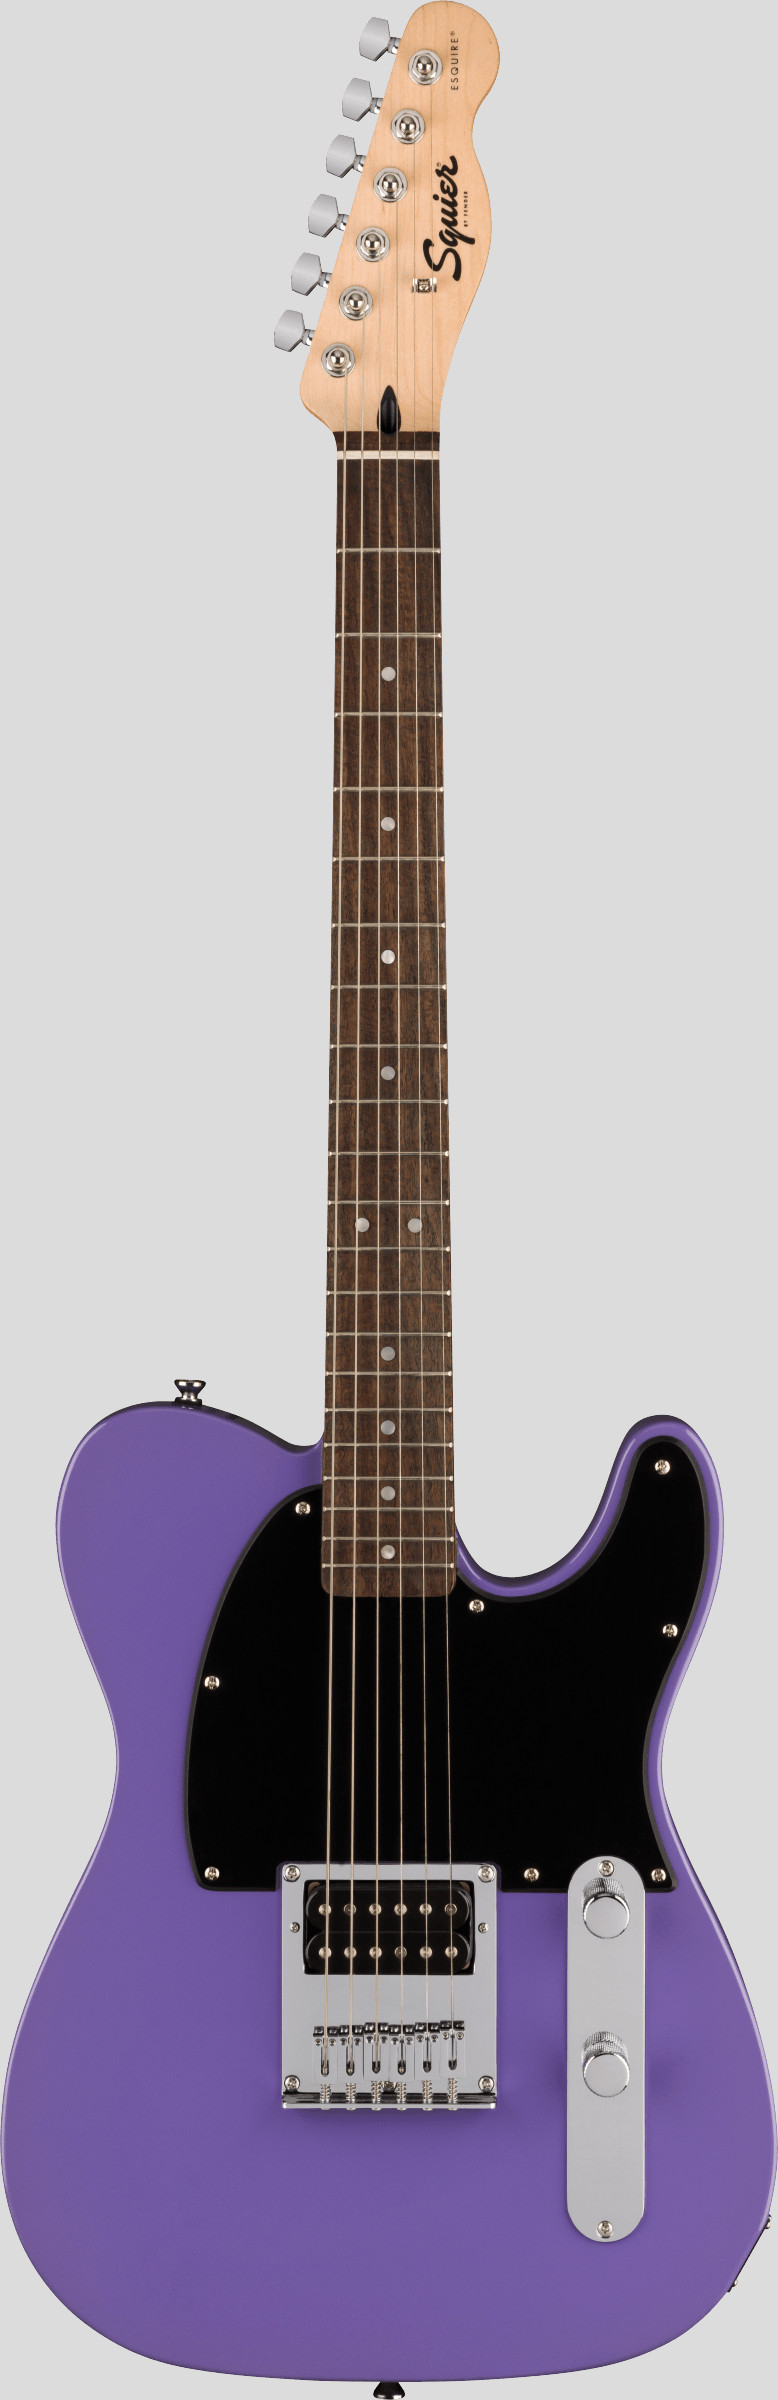 Squier by Fender Sonic Esquire H Ultraviolet 1